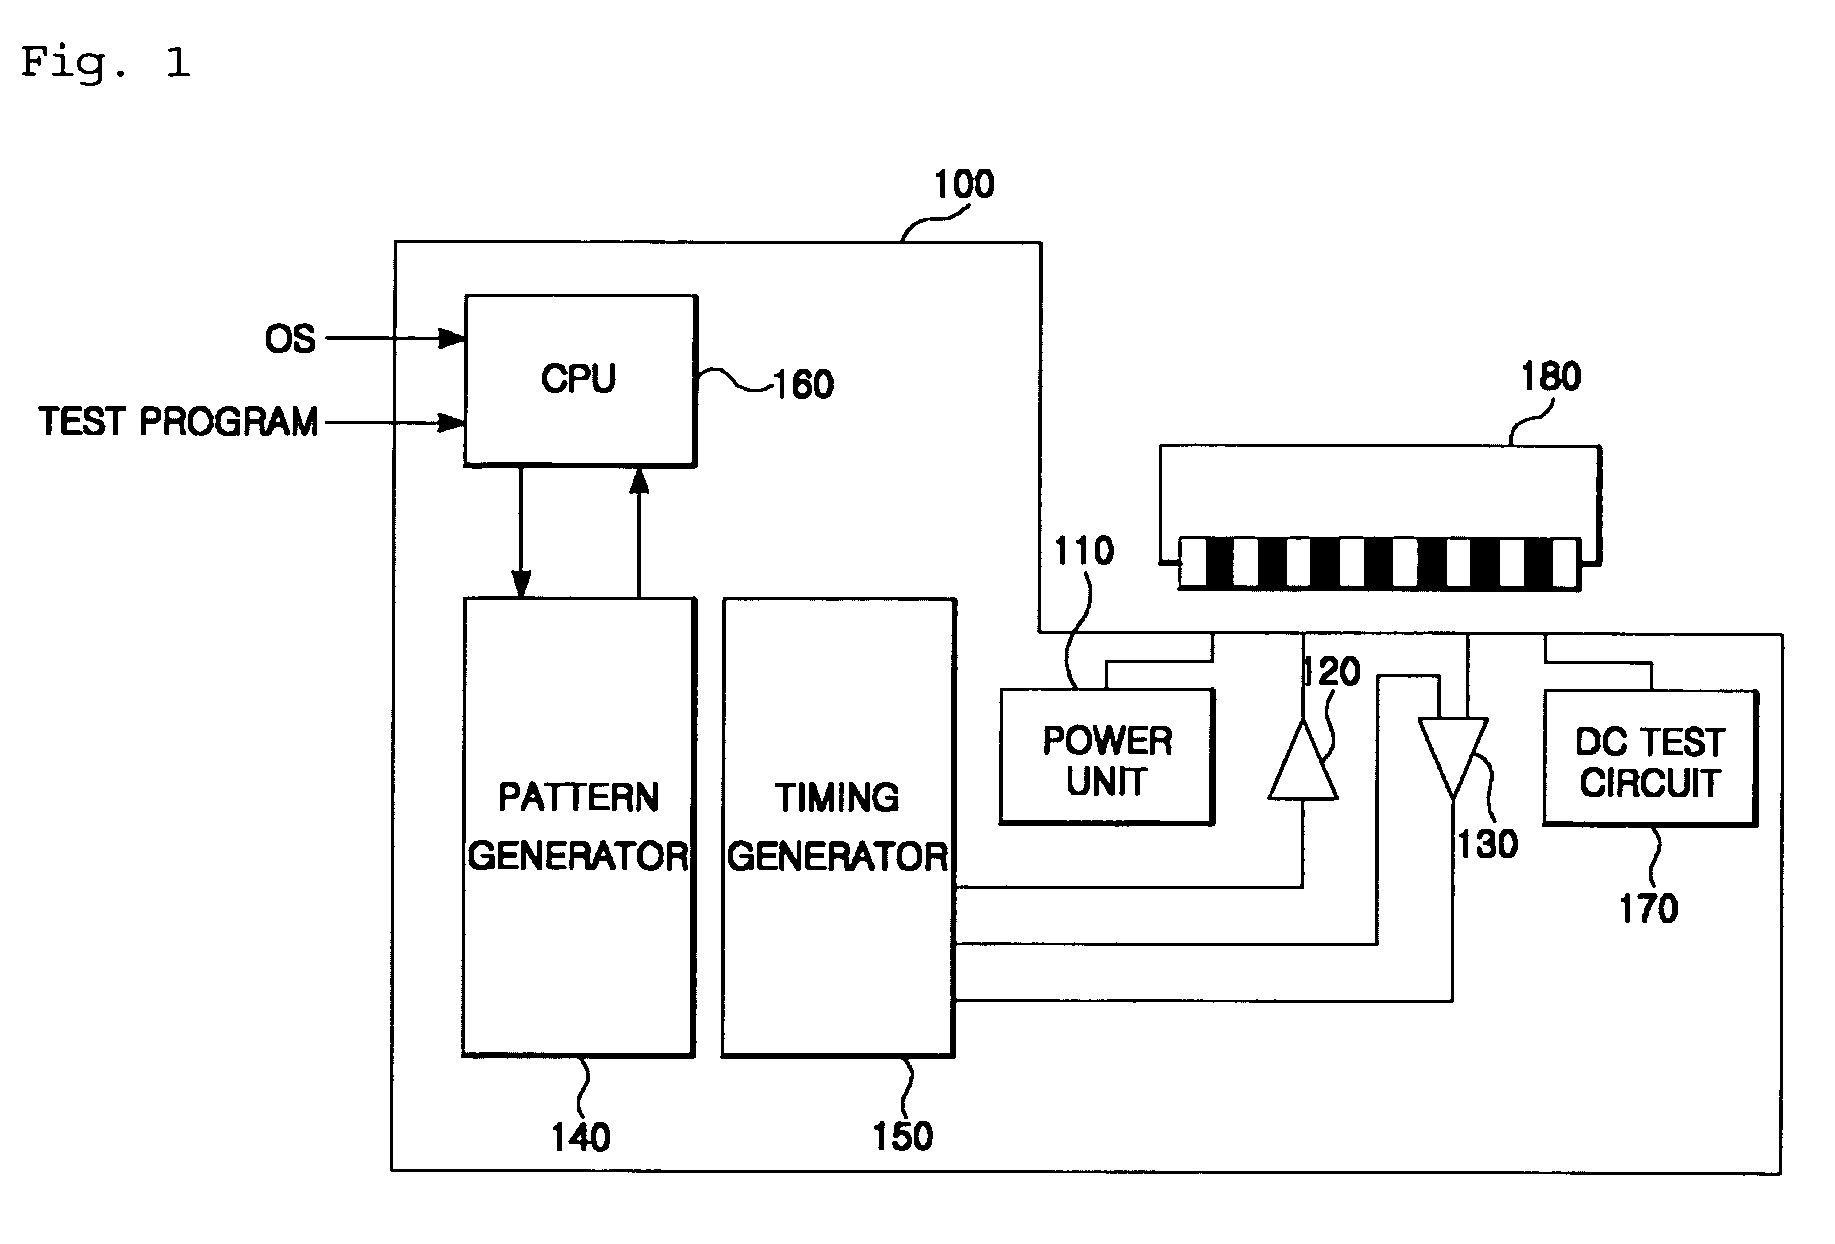 Semiconductor test apparatus for simultaneously testing plurality of semiconductor devices